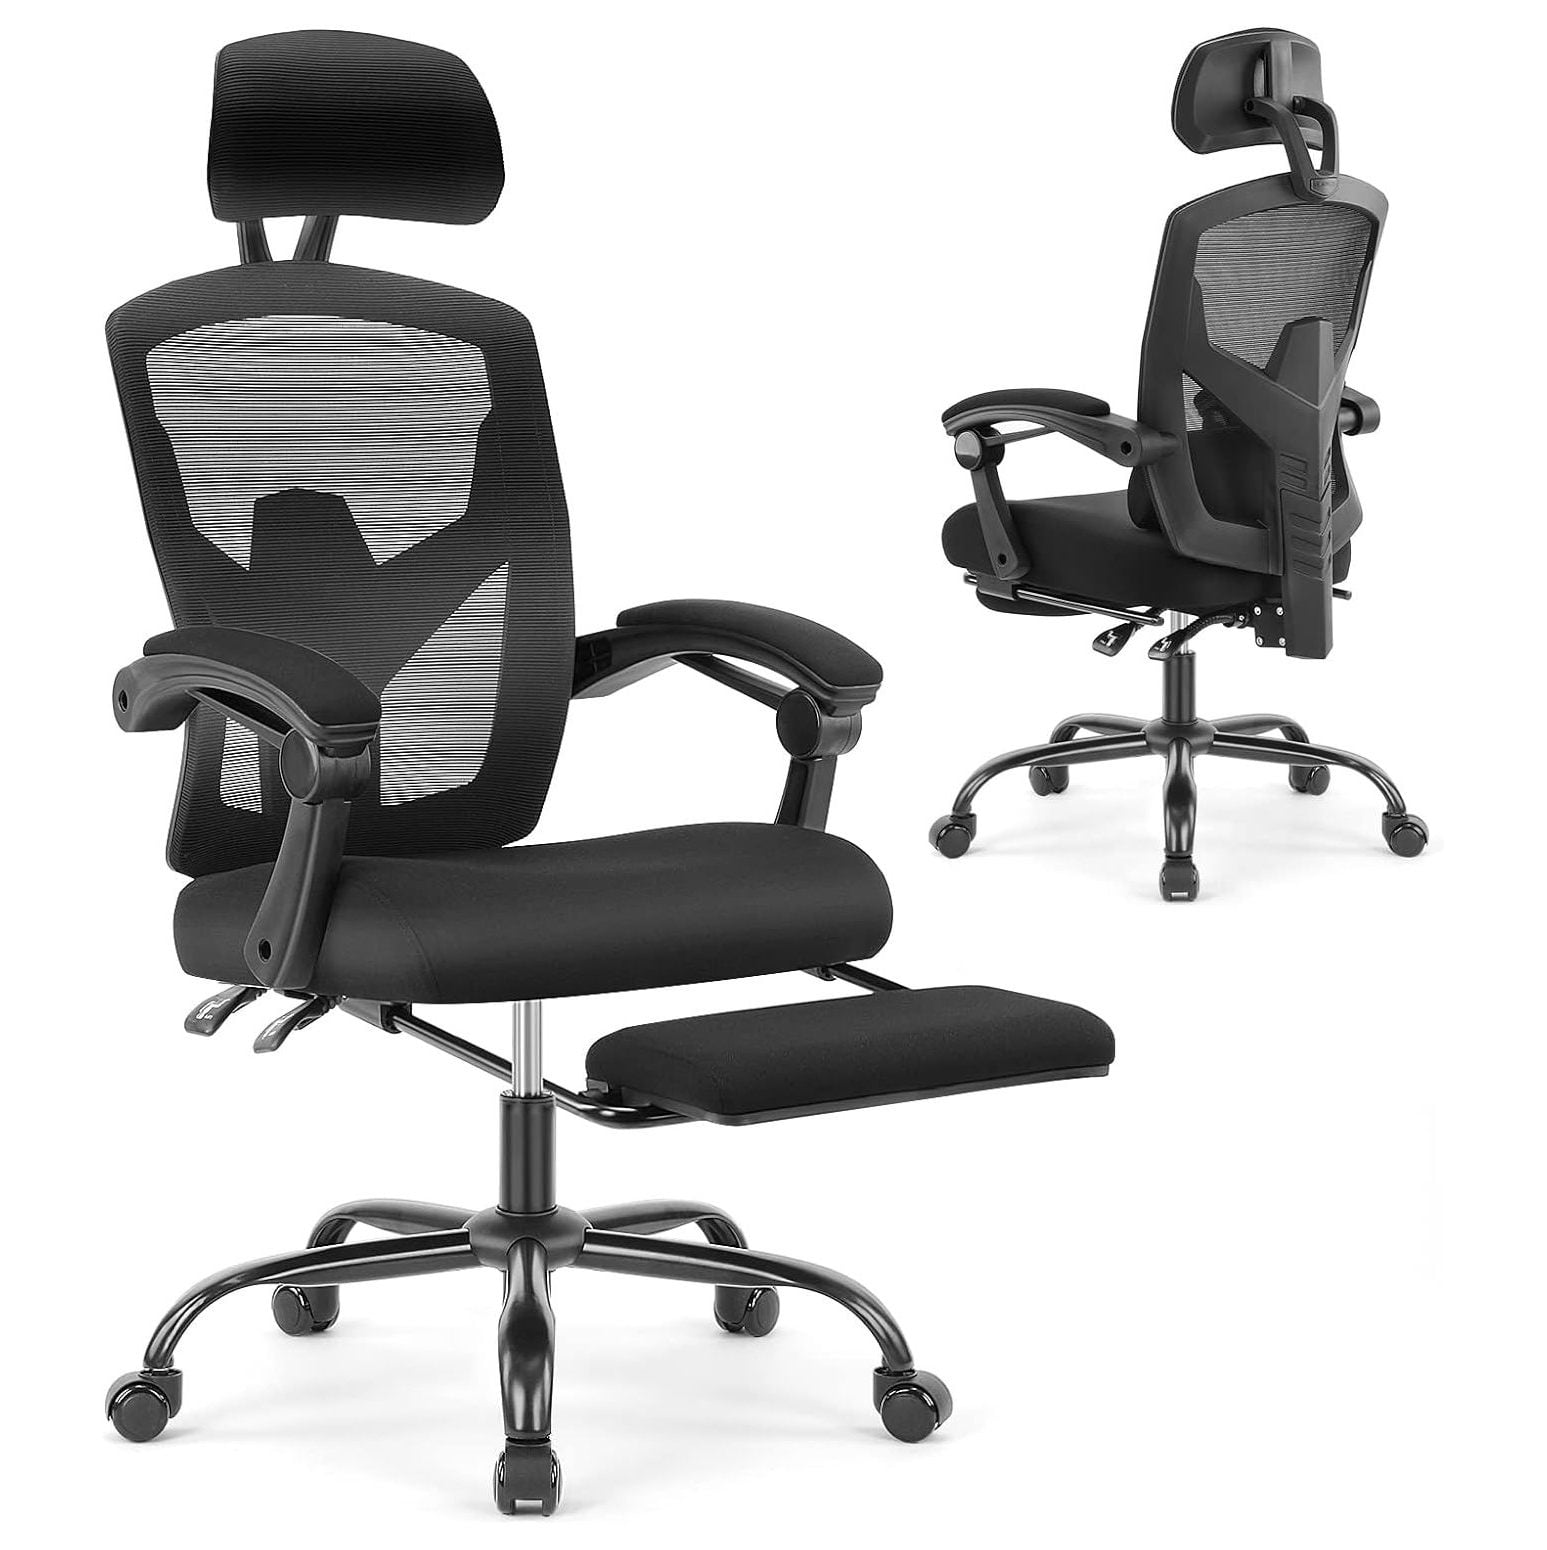 Gaming Chair - Ergonomic Office Chair with Foot Rest Reclining Office Chair,  High Back Mesh Home Office Computer Desk Chair with Wheels, Adjustable  Headrest, Lumbar Support, Padded Arms 